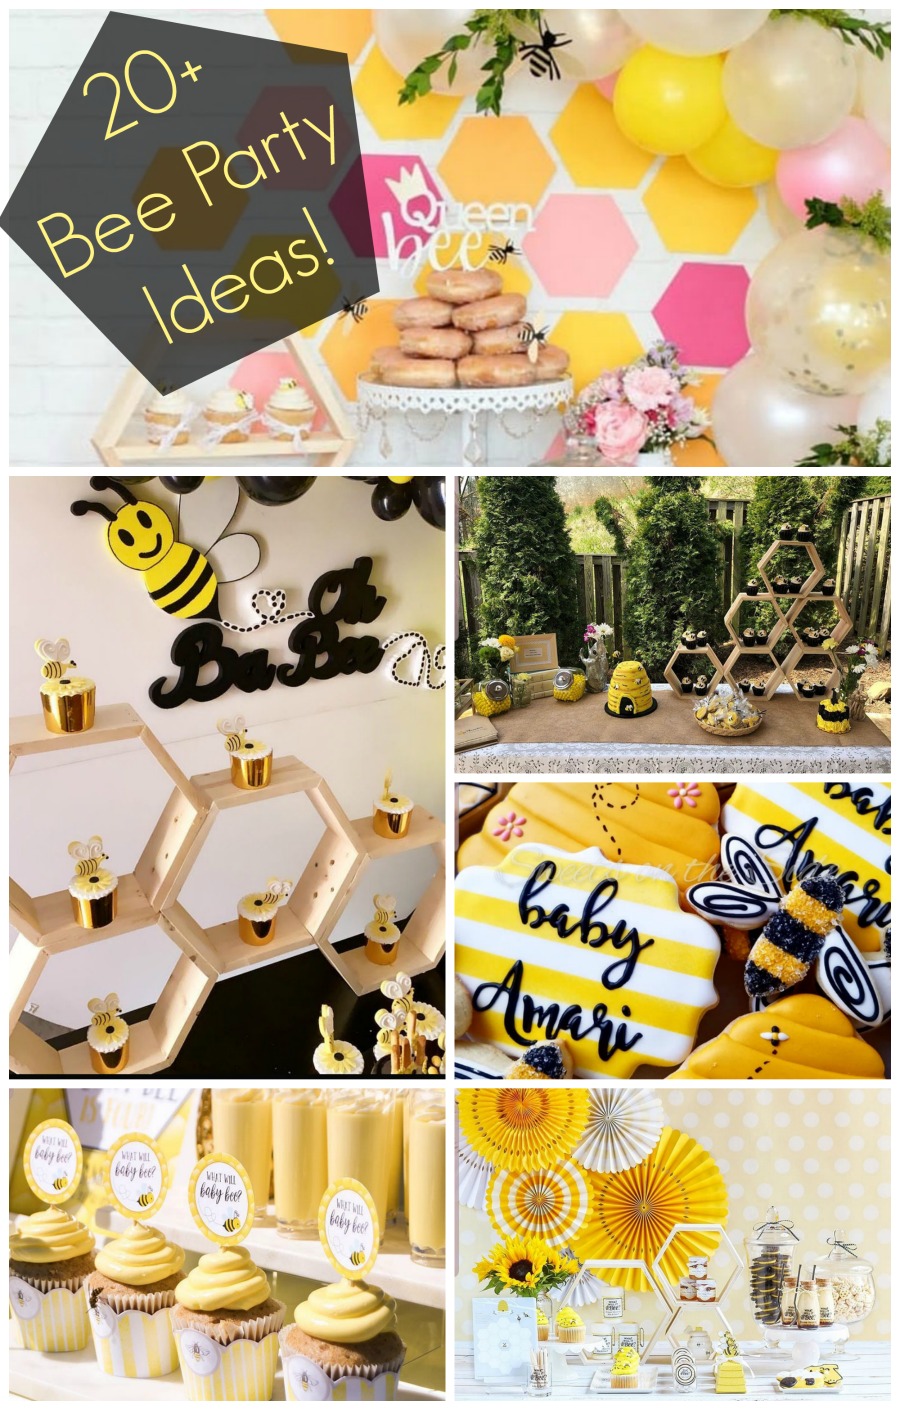 https://www.blovelyevents.com/wp-content/uploads/2019/08/20-Bee-Party-Ideas-B.-Lovely-Events.jpg